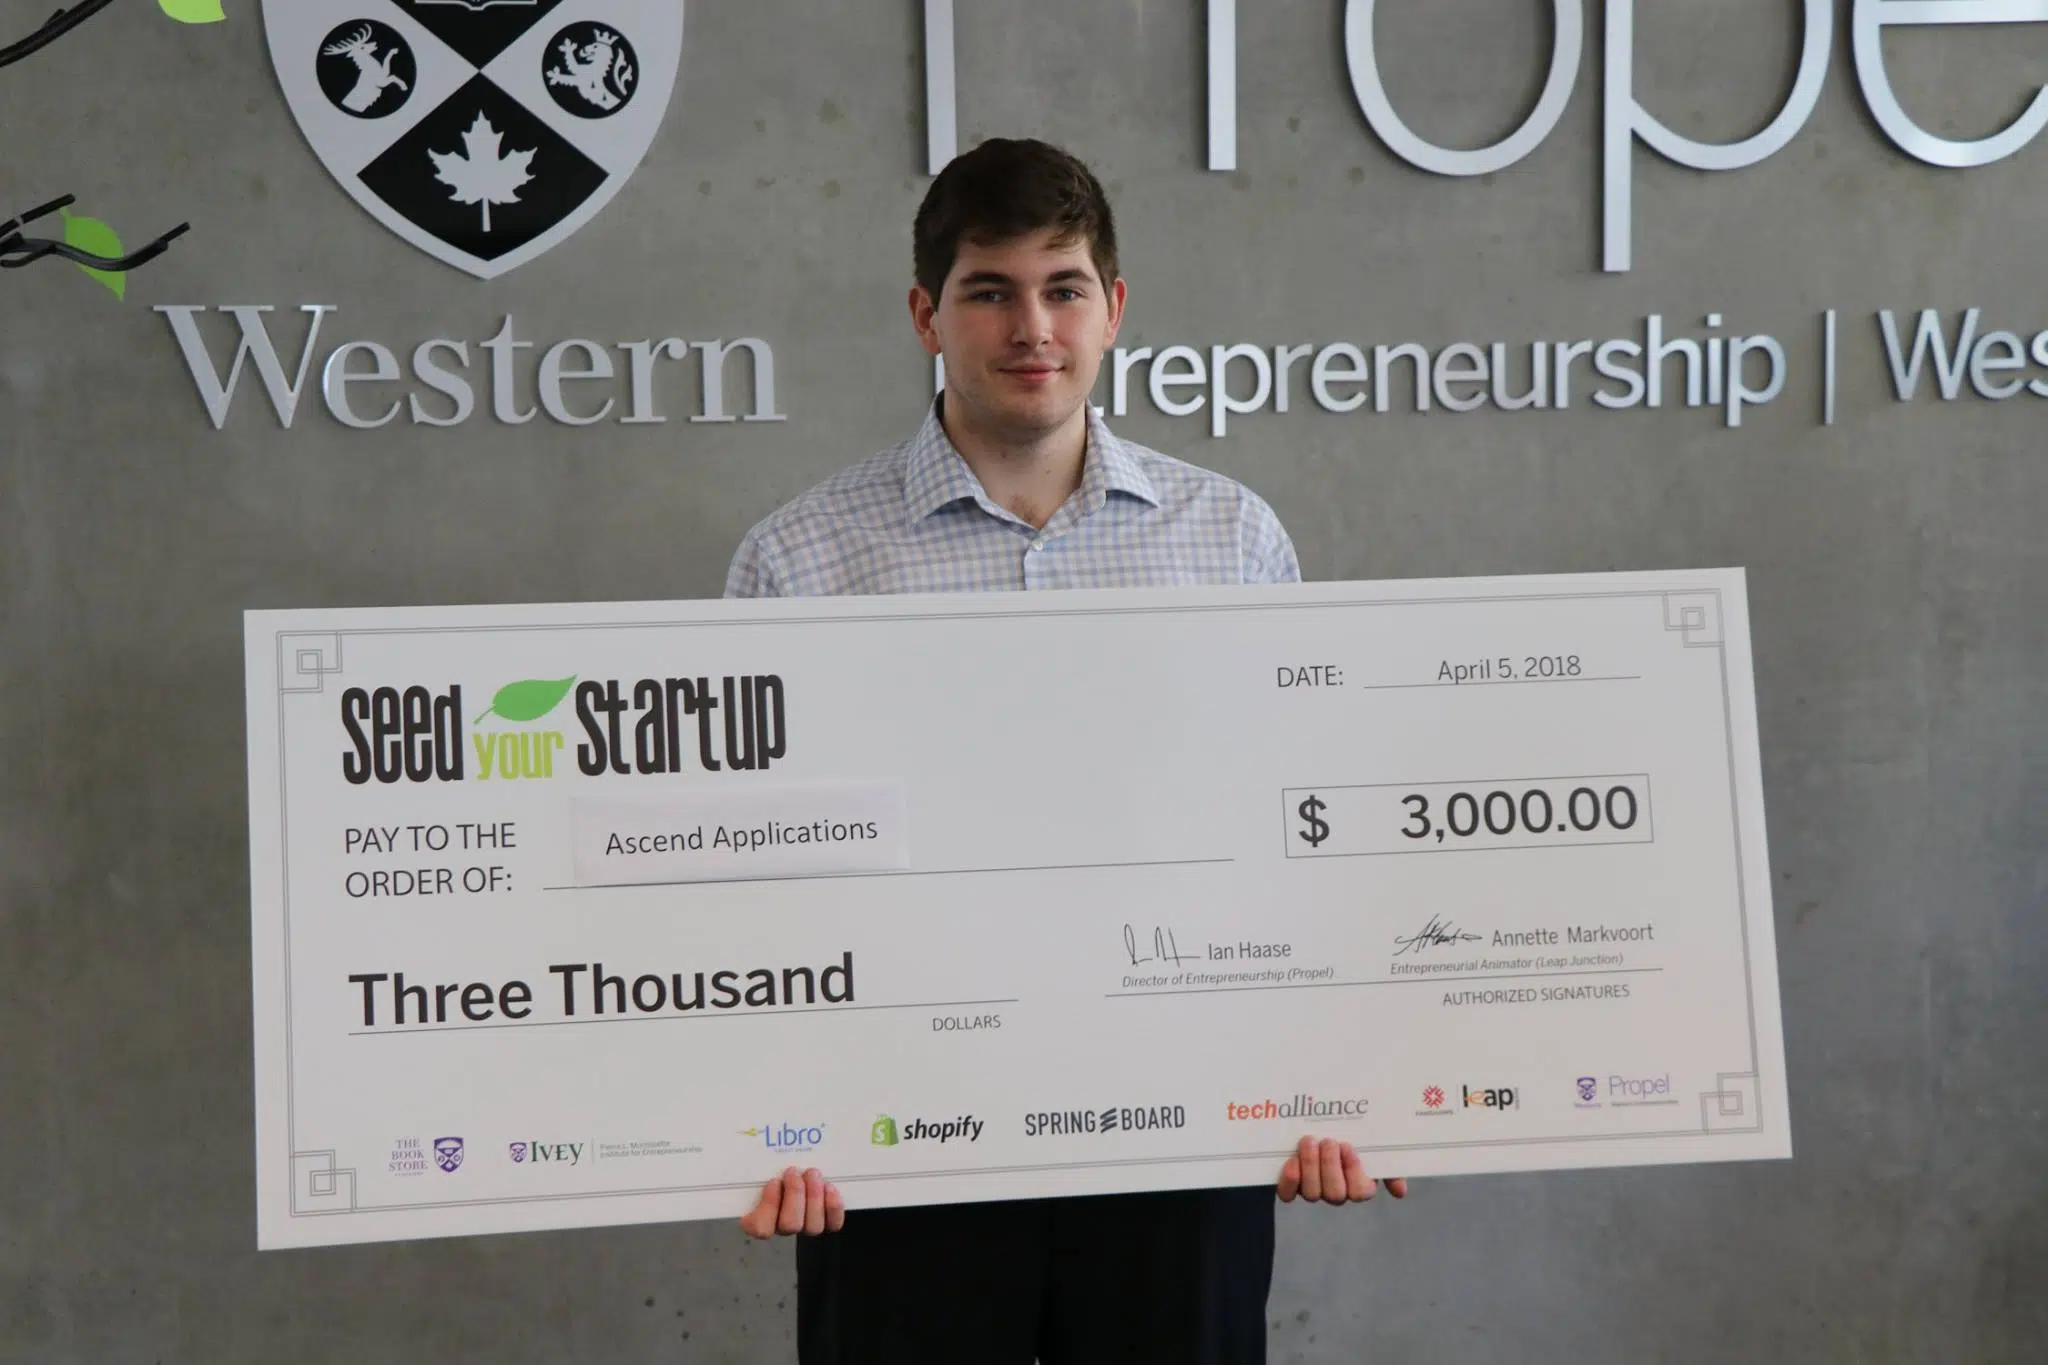 Fanshawe Programing Student Wins at Seed Your Startup Pitch Competition